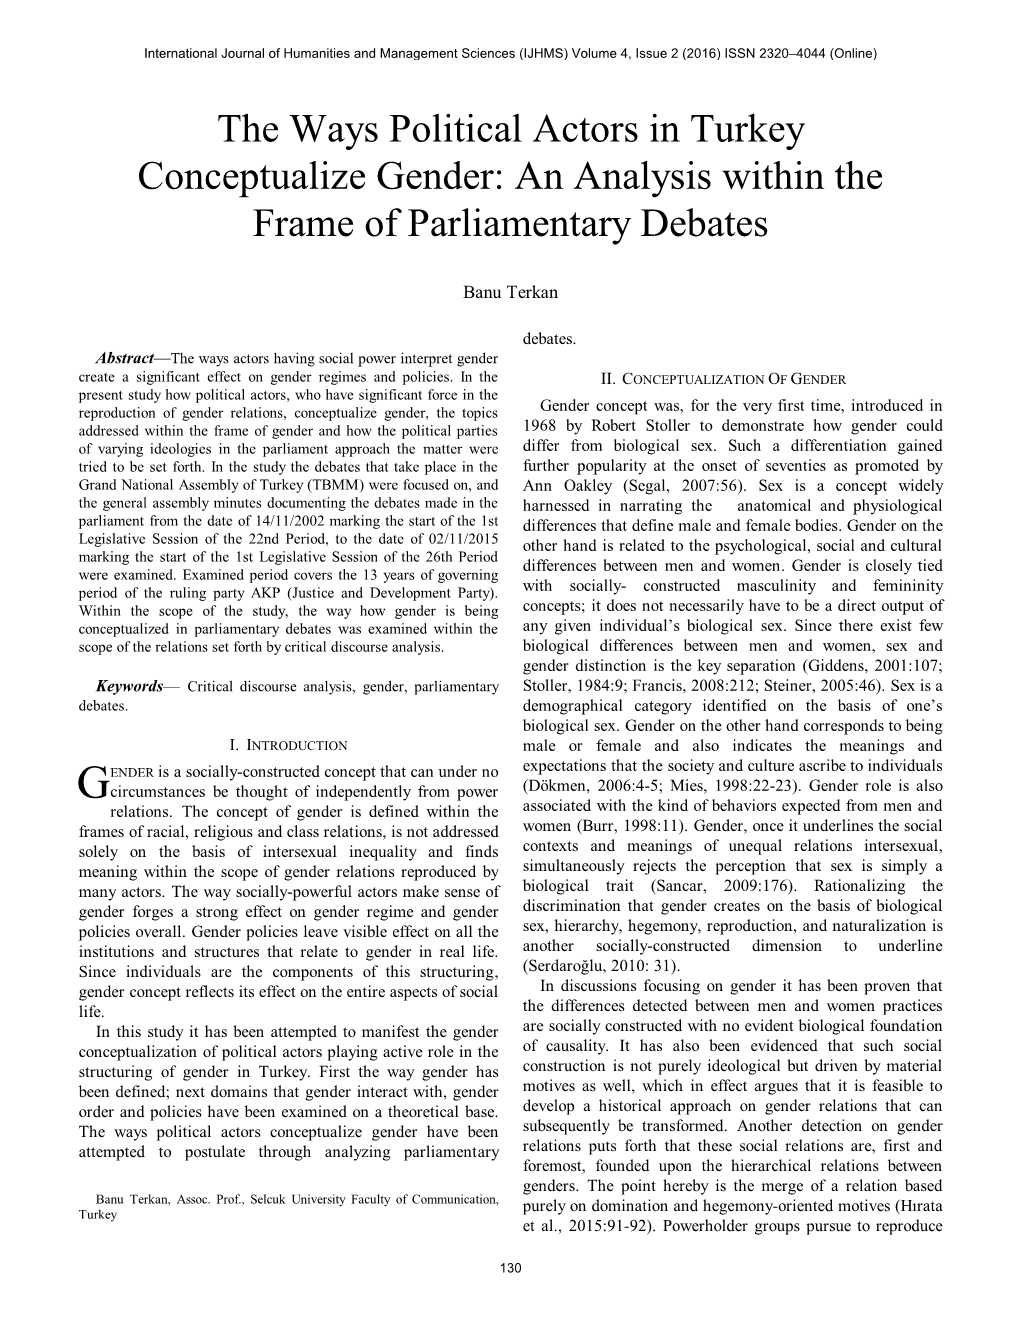 The Ways Political Actors in Turkey Conceptualize Gender: an Analysis Within the Frame of Parliamentary Debates